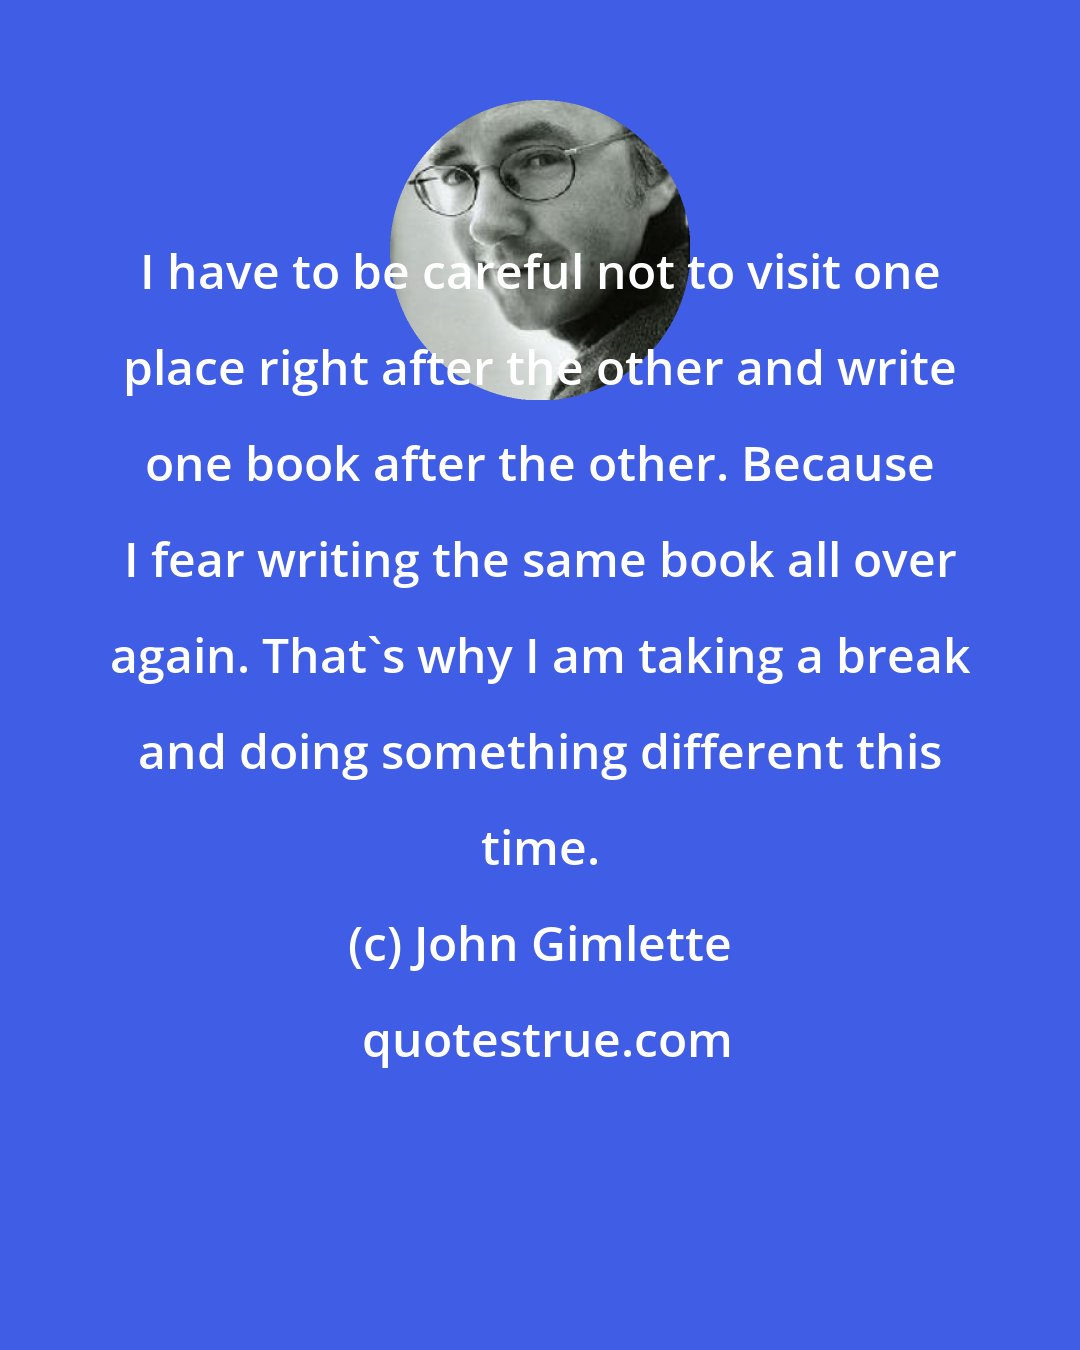 John Gimlette: I have to be careful not to visit one place right after the other and write one book after the other. Because I fear writing the same book all over again. That's why I am taking a break and doing something different this time.